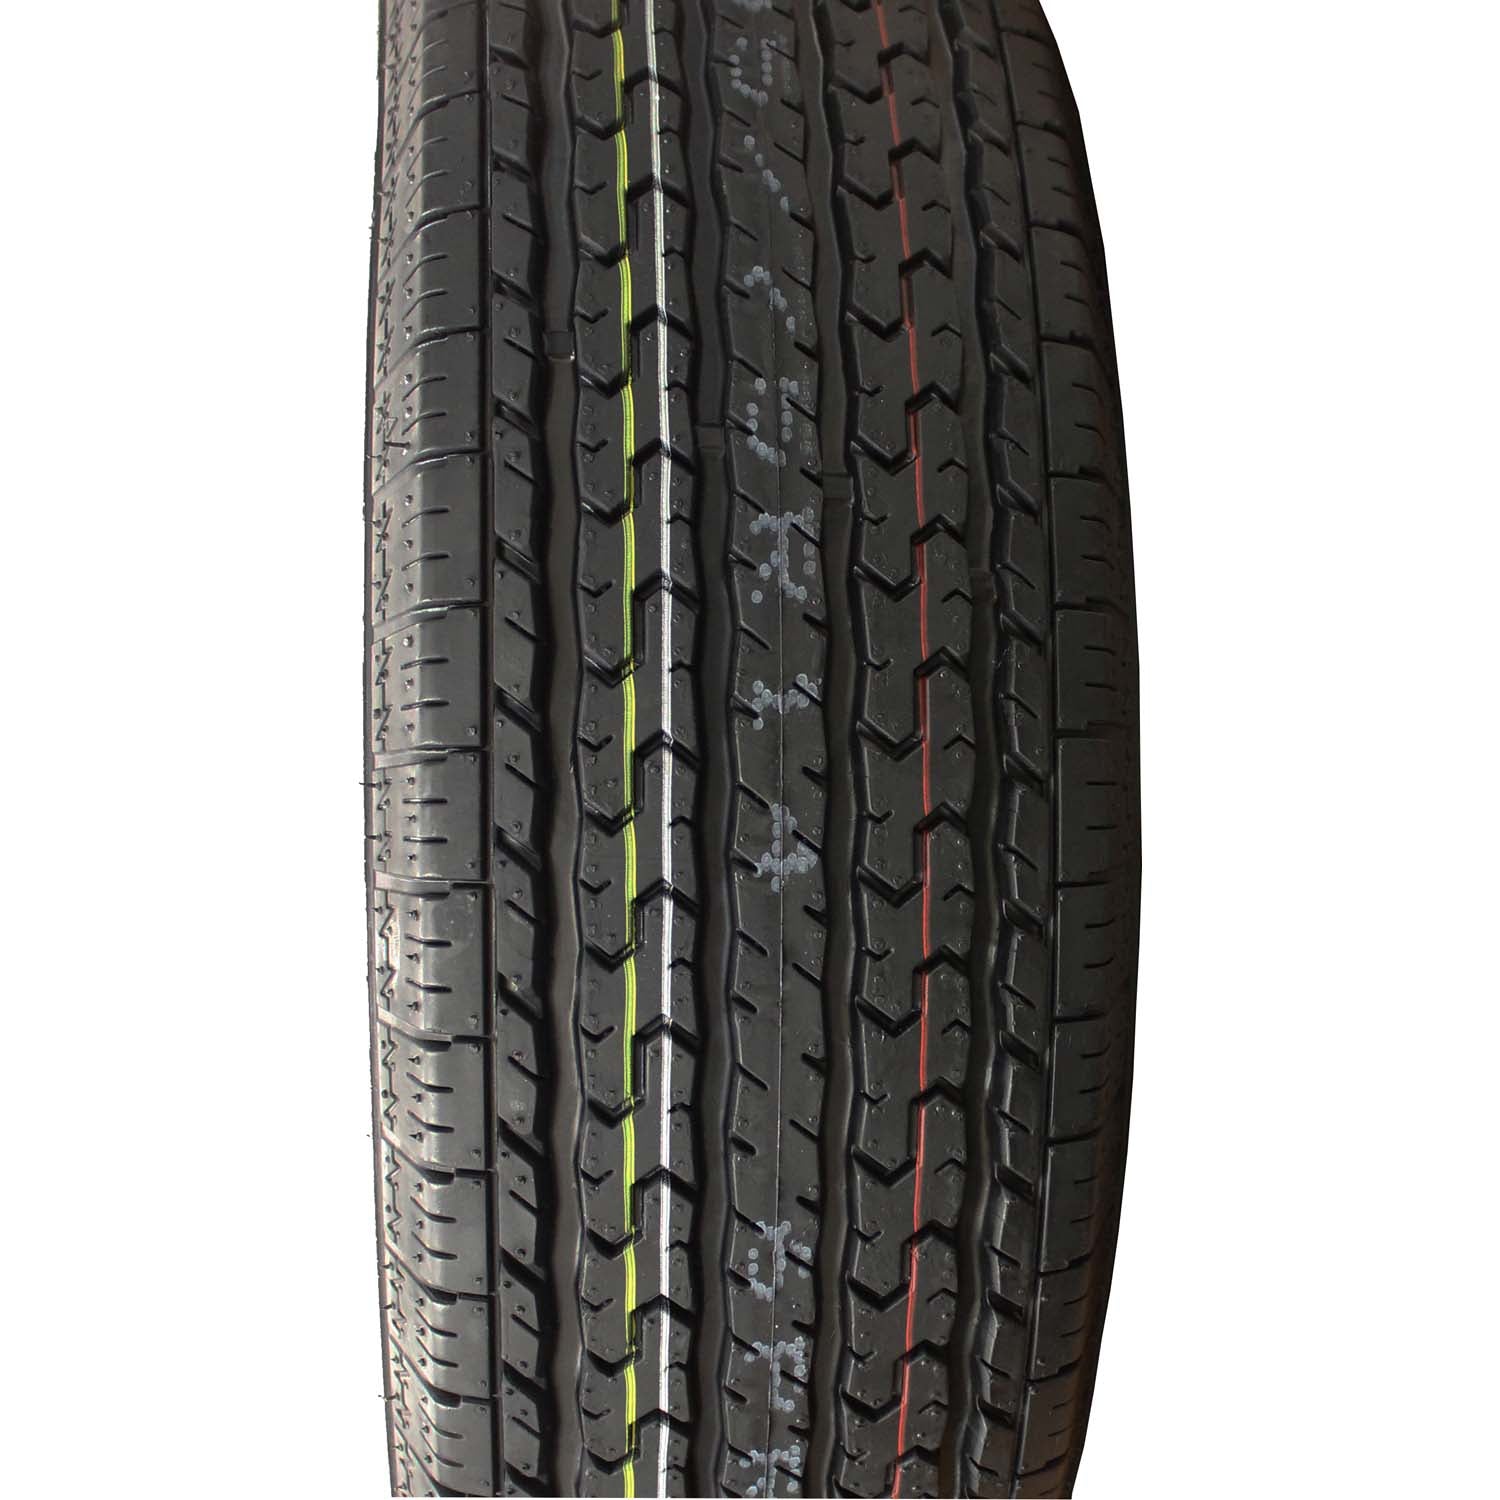 Carlstar Ultra CRT Radial Trailer Tire LRC 6Ply ST215/75R14 Pack of 4